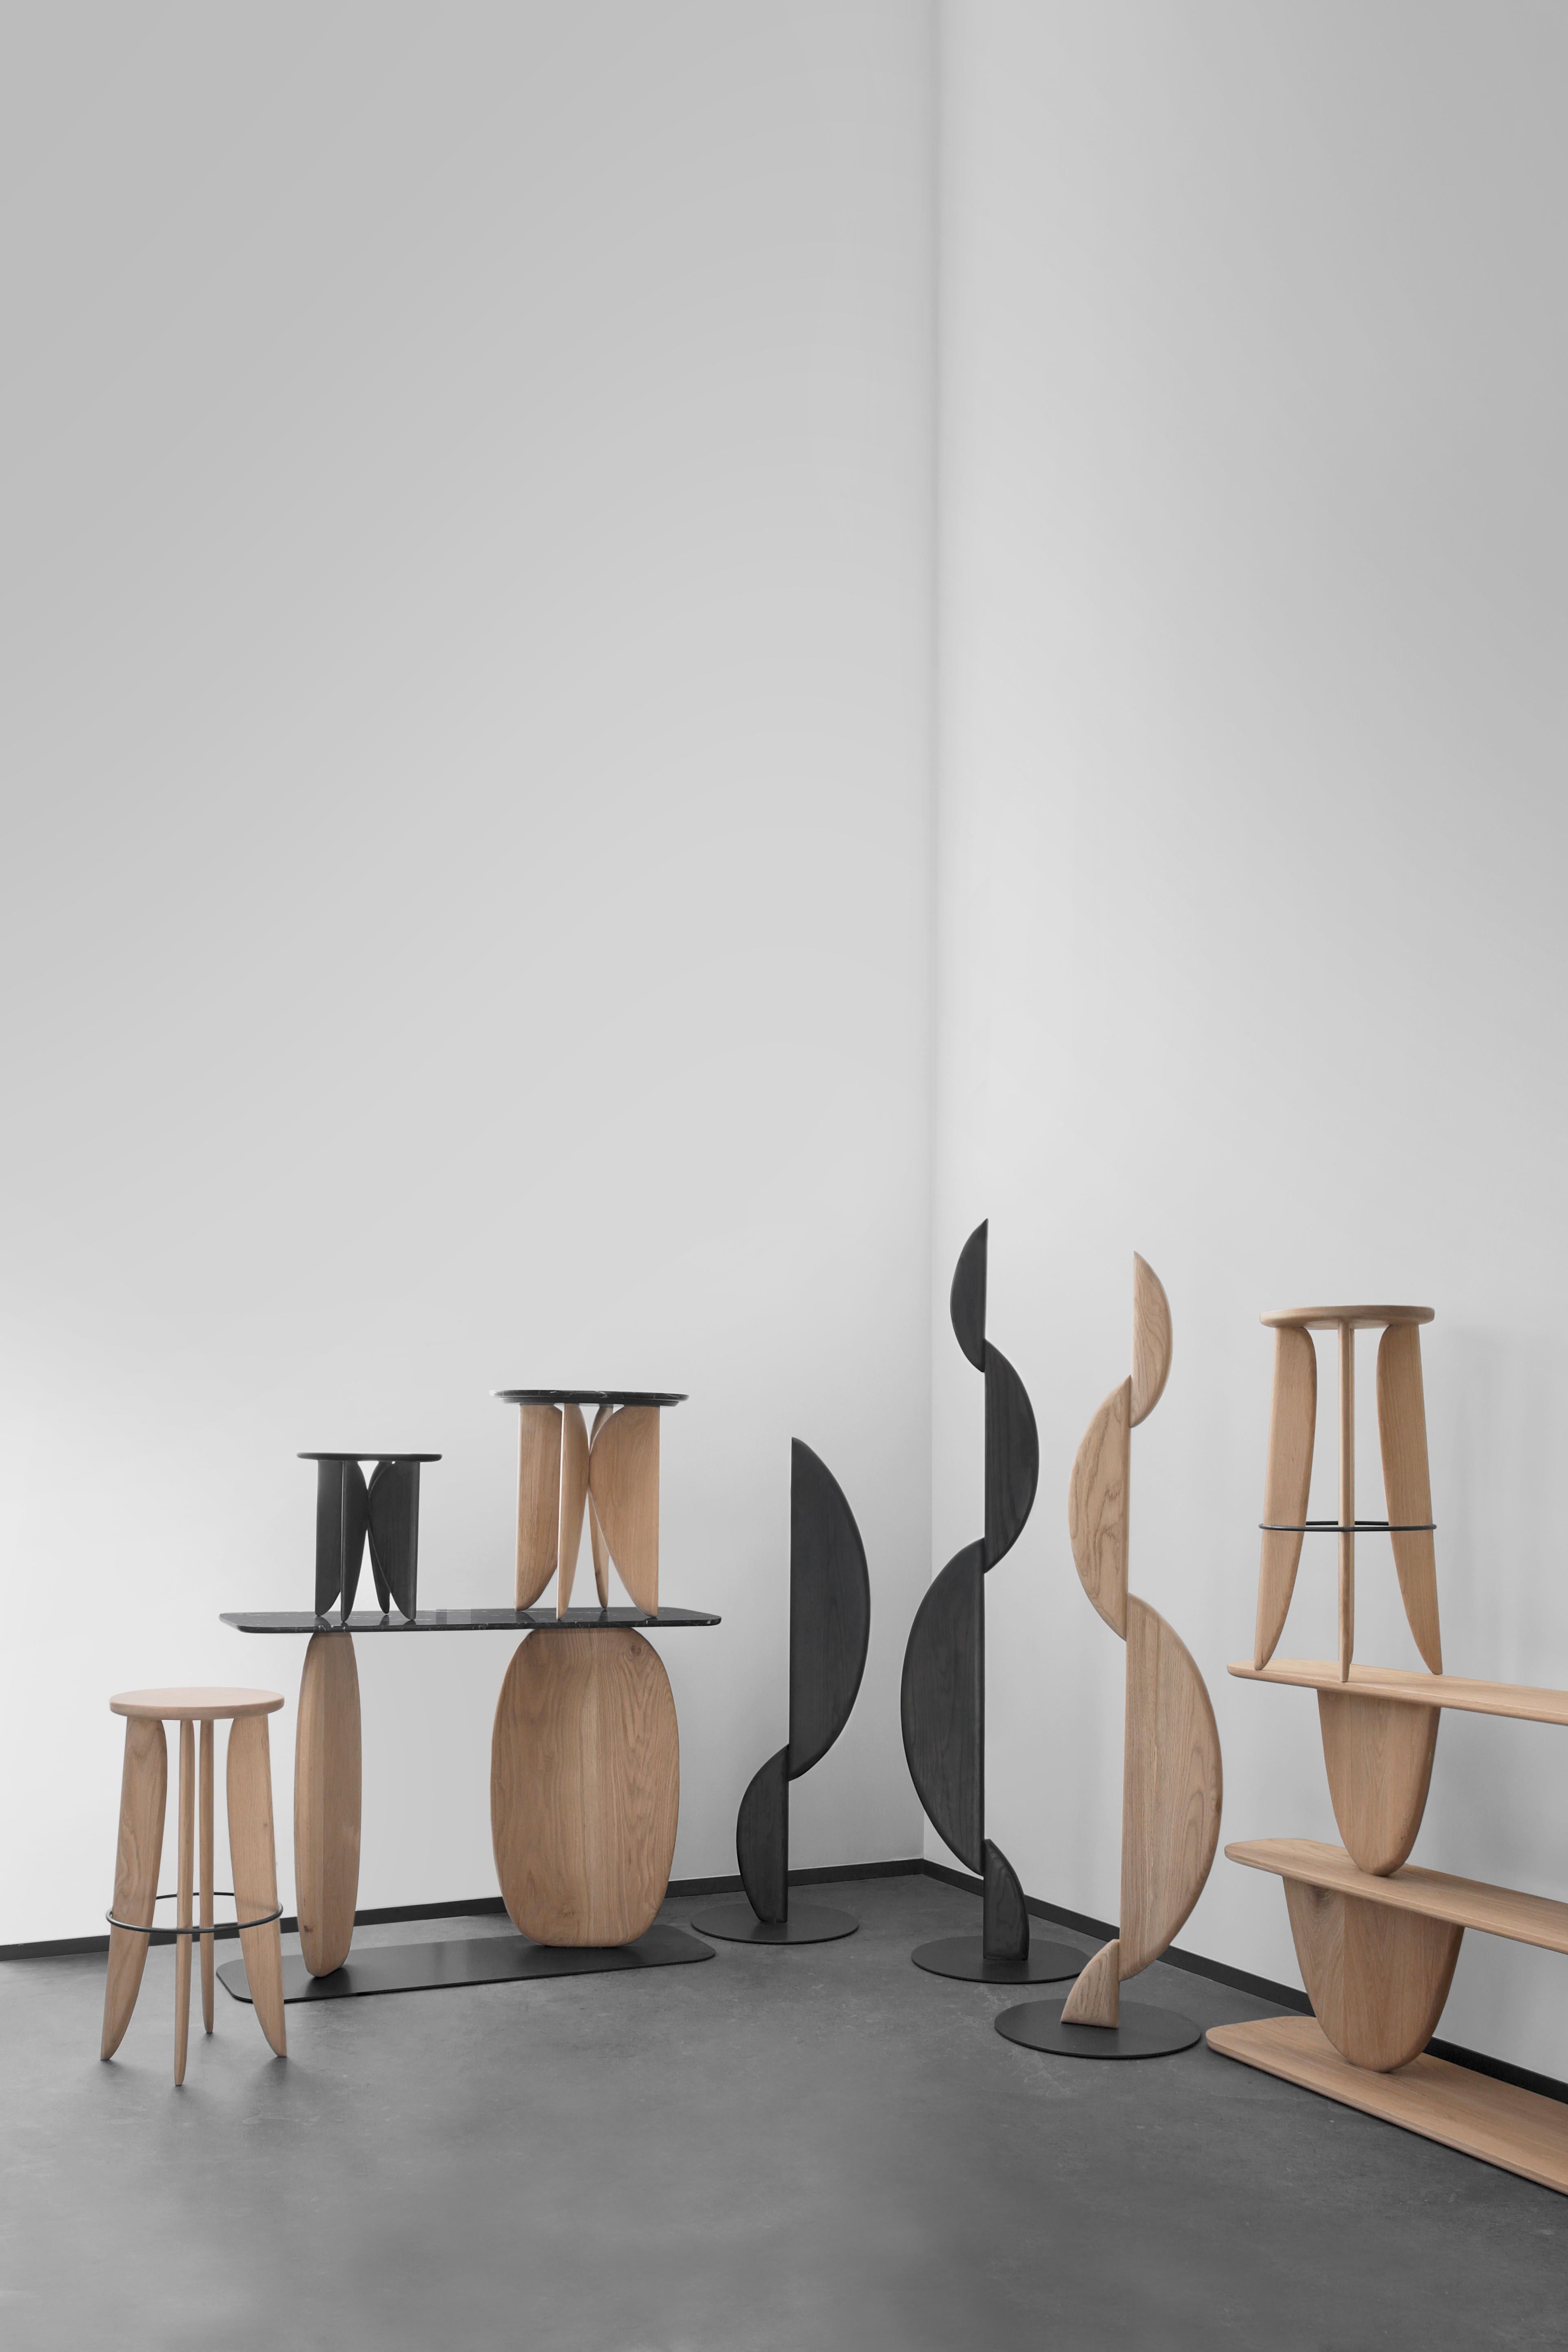 Mexican Noviembre V Stool, Side Table inspired in Brancusi in Oak Wood by Joel Escalona